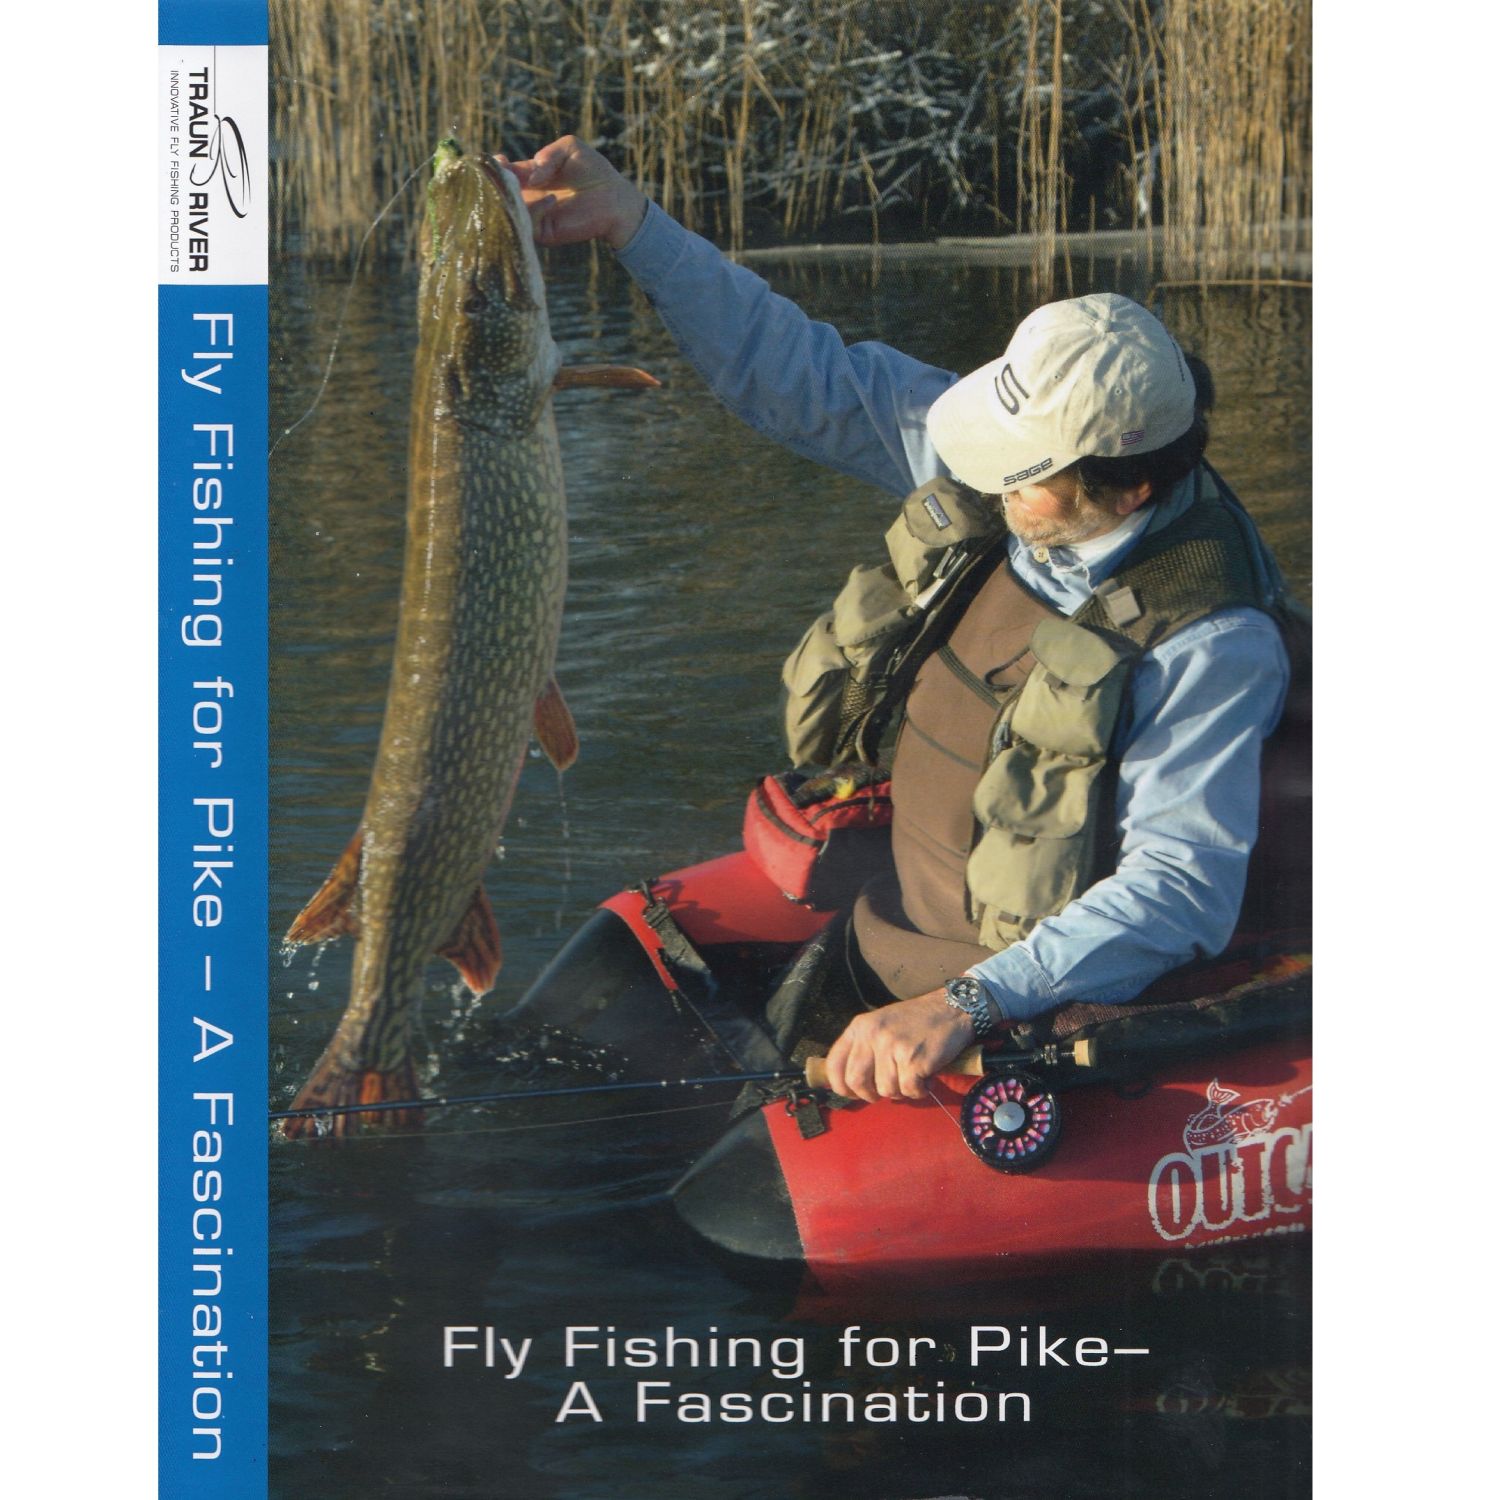 Fly Fishing for Pike - A Fascination